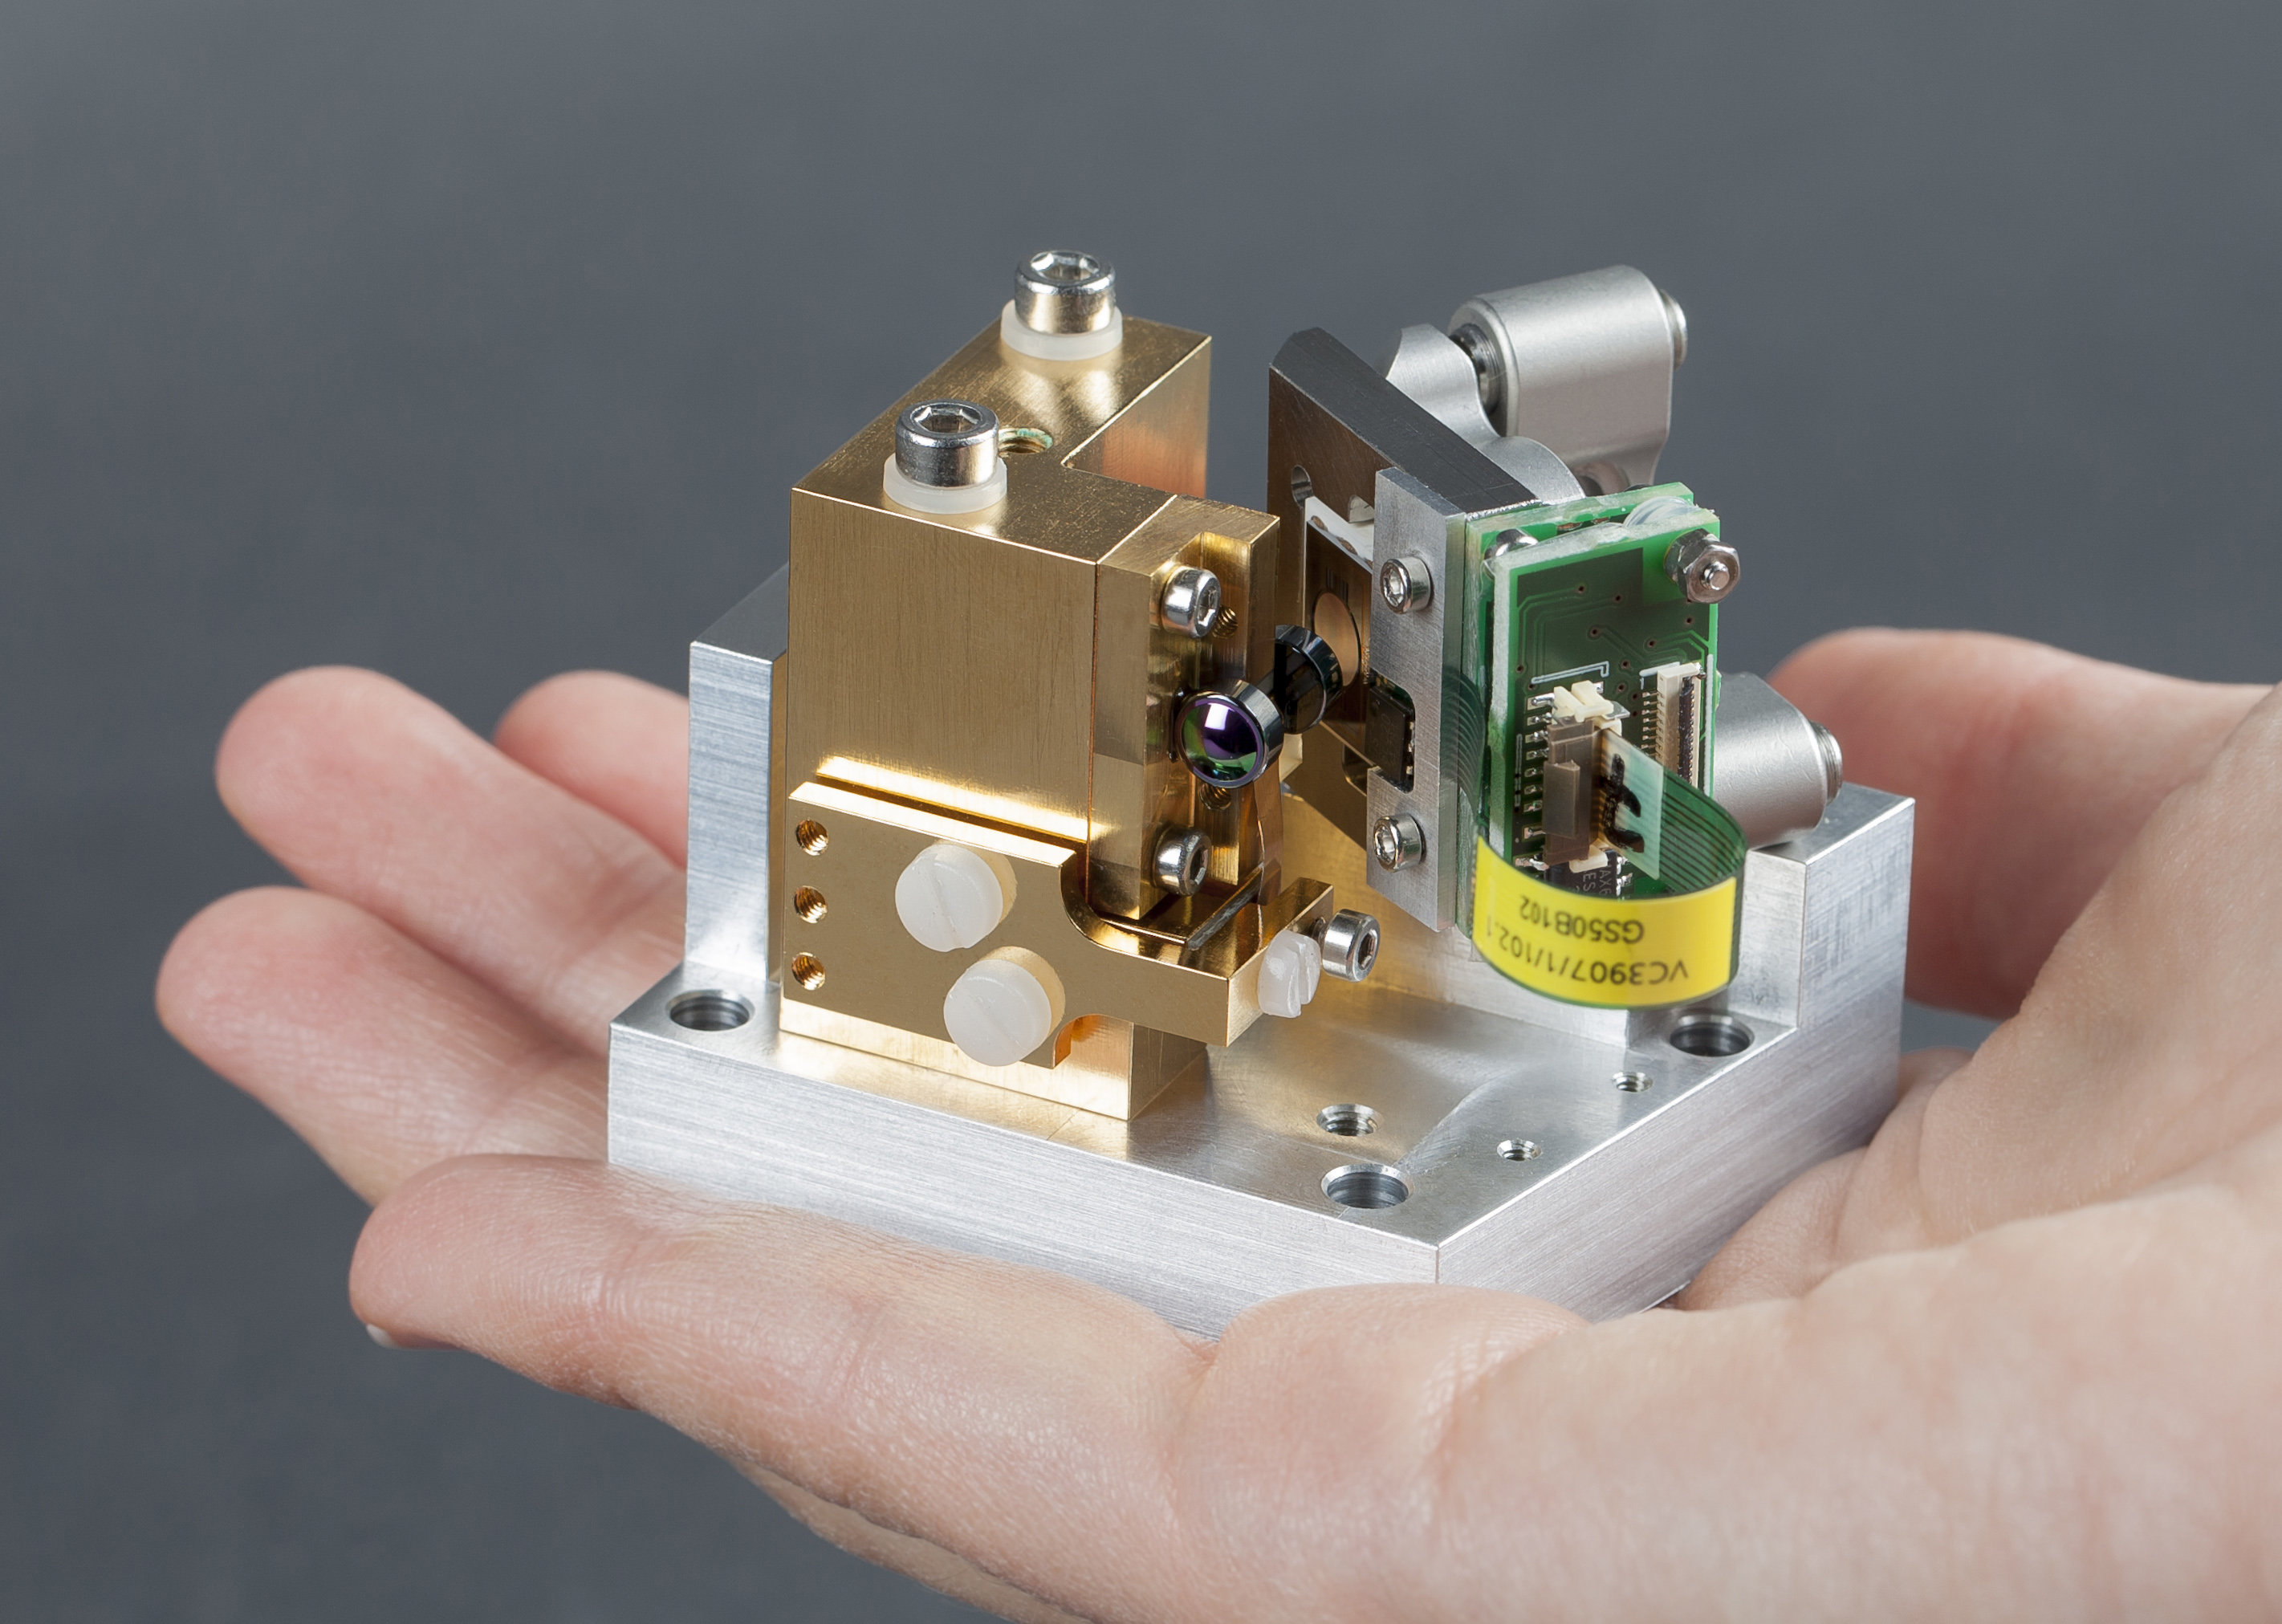 Demonstrator of the miniaturized laser source consisting of a quantum cascade laser chip and a MOEMS grating scanner.